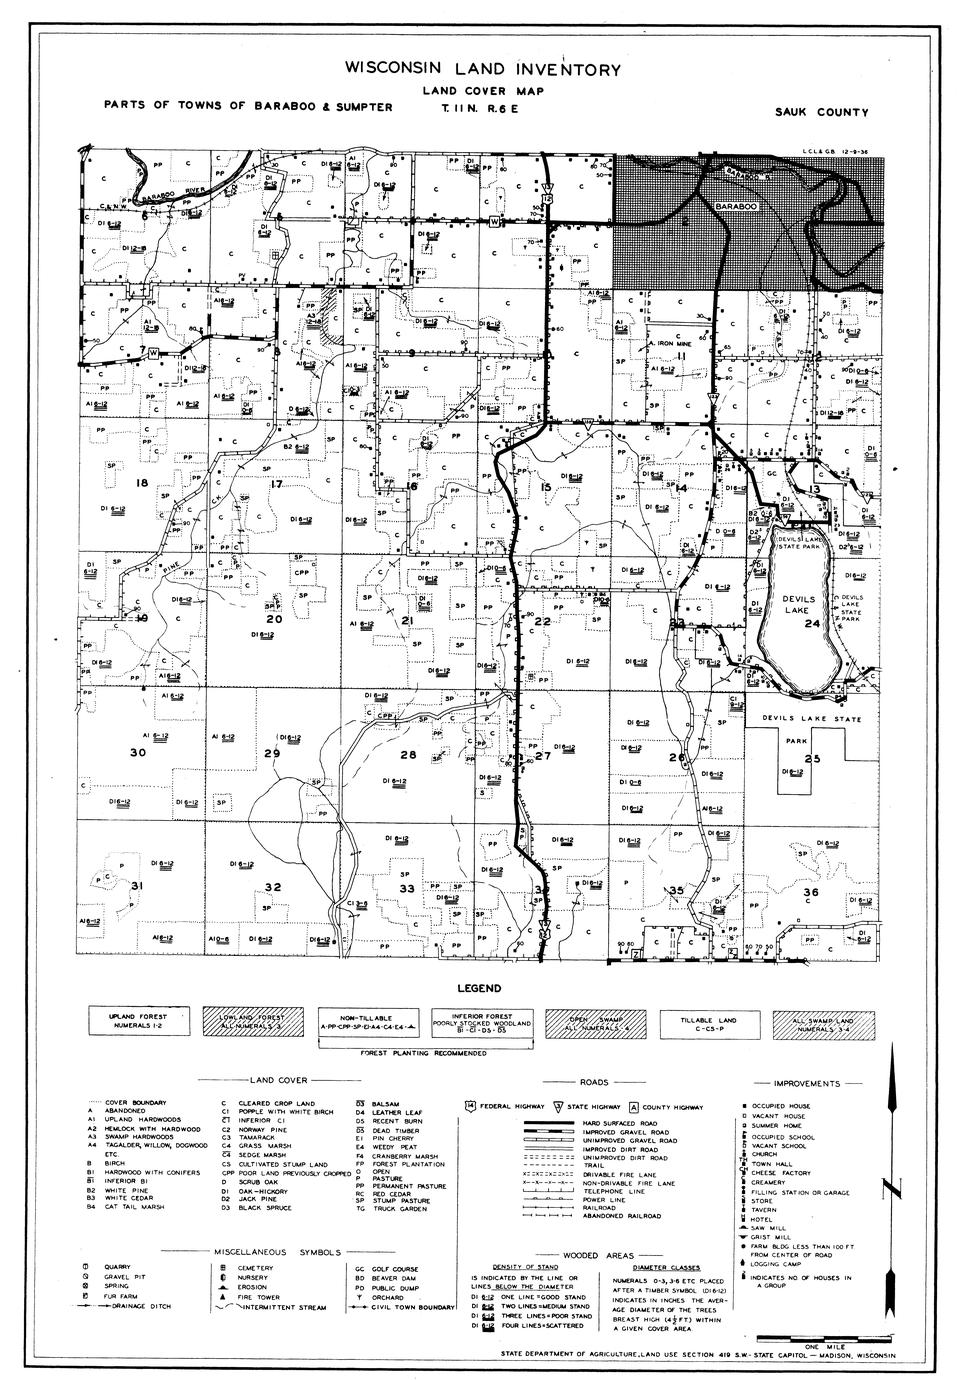 Parts of towns of Baraboo and Sumpter